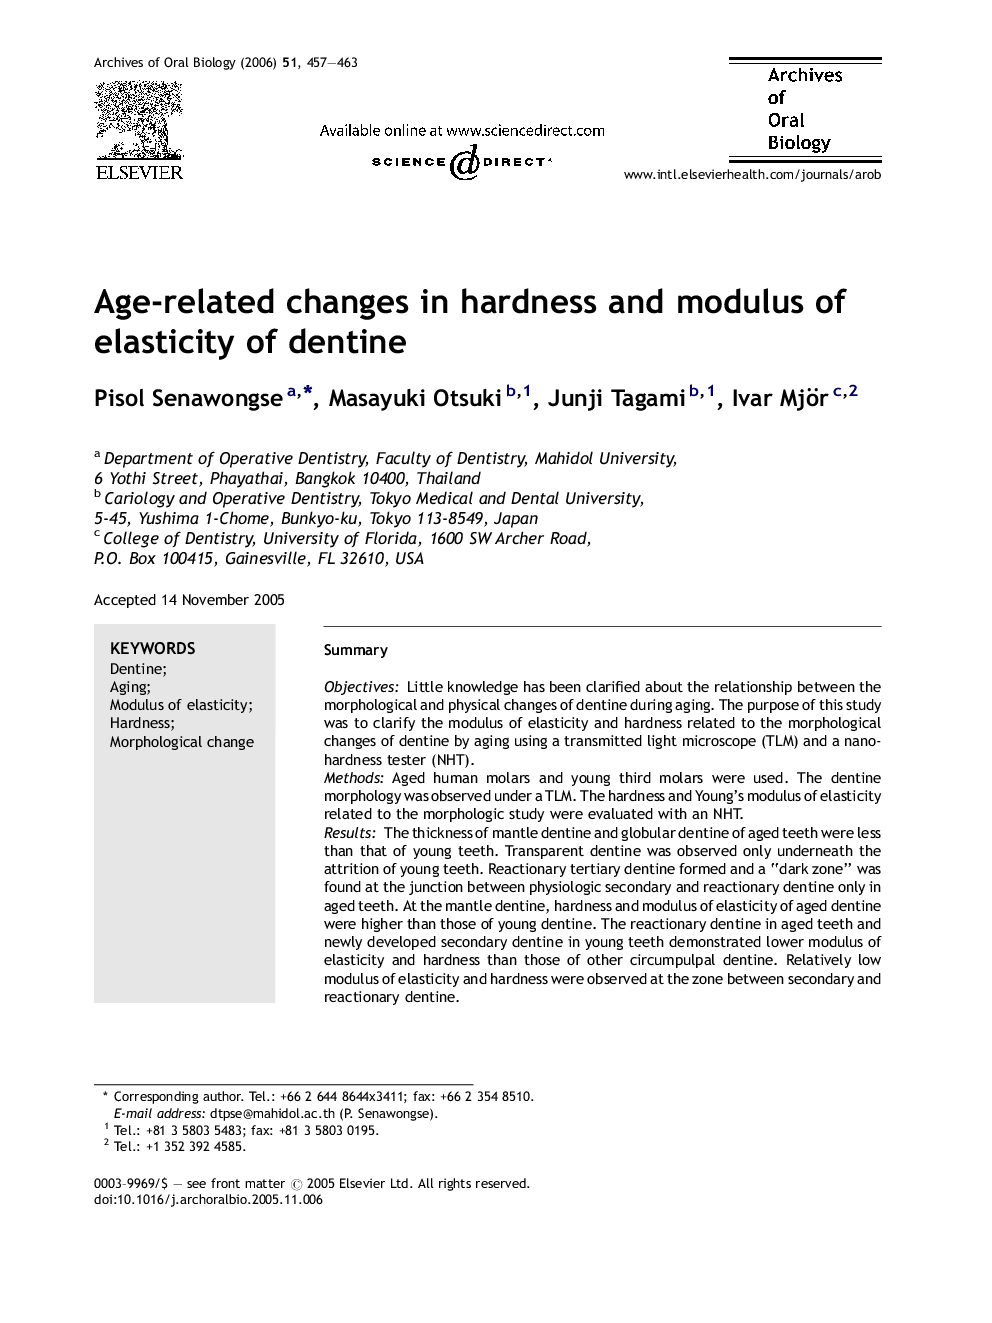 Age-related changes in hardness and modulus of elasticity of dentine